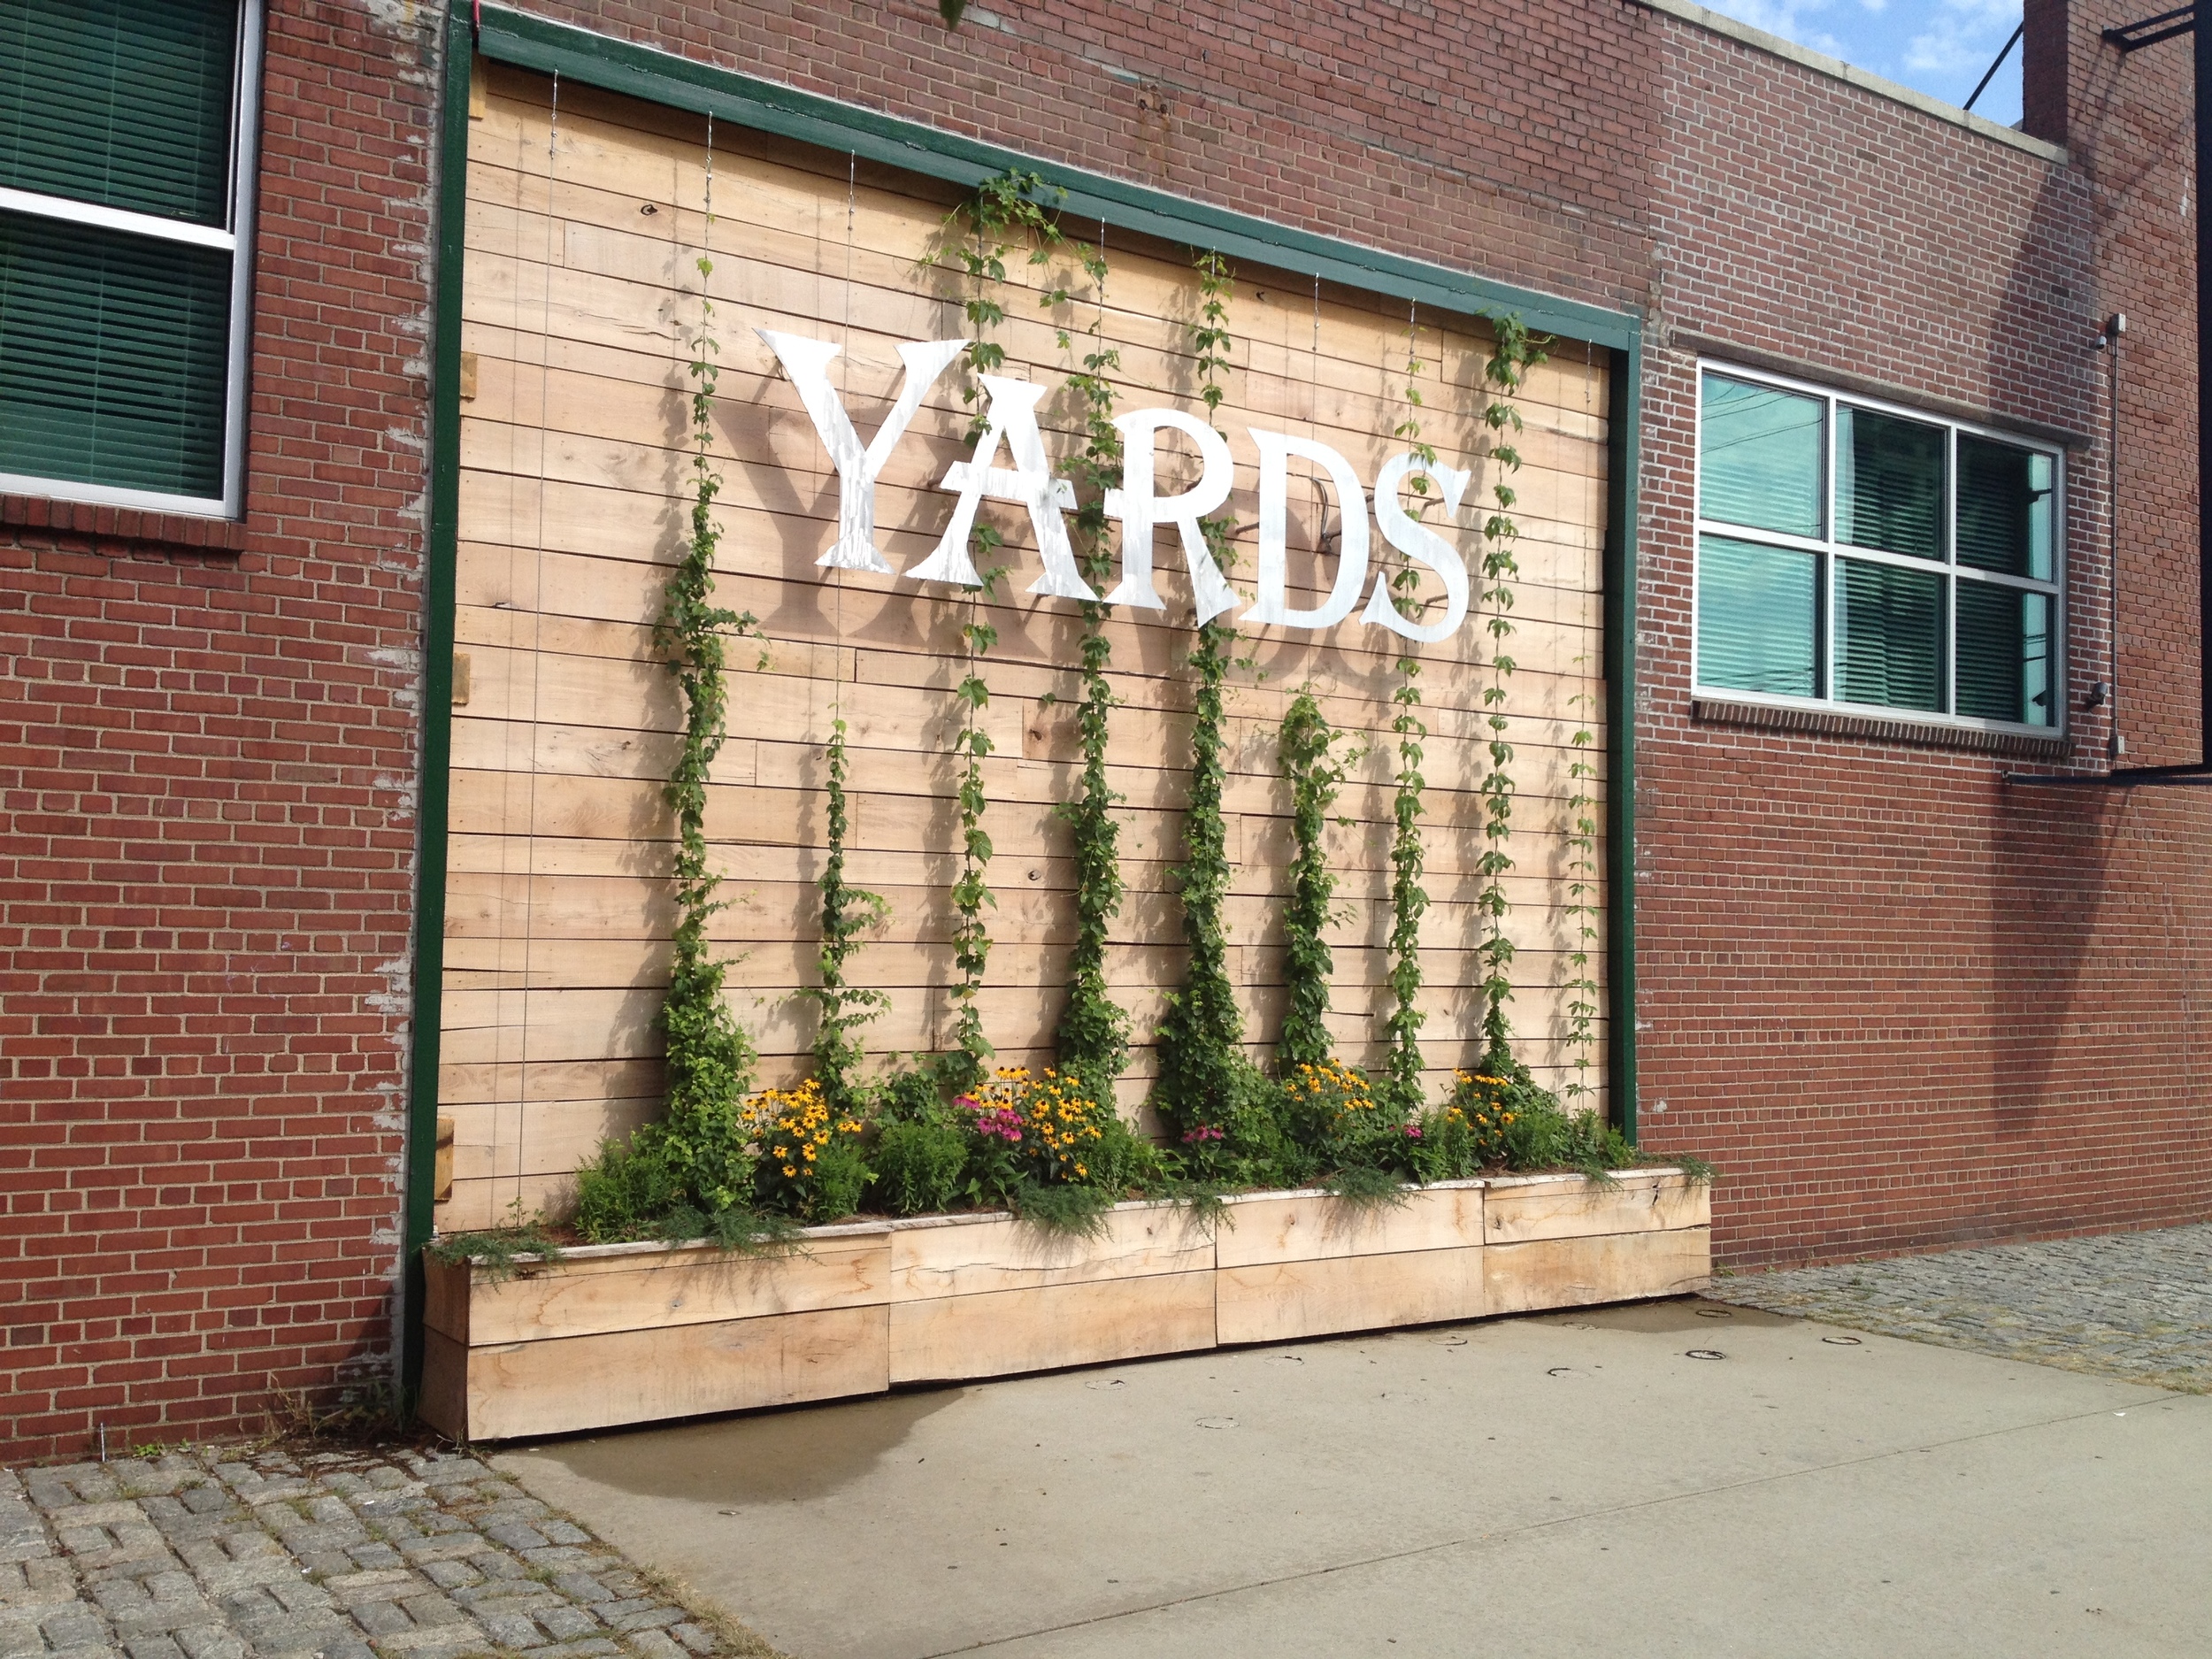 Sign and planters with hops.